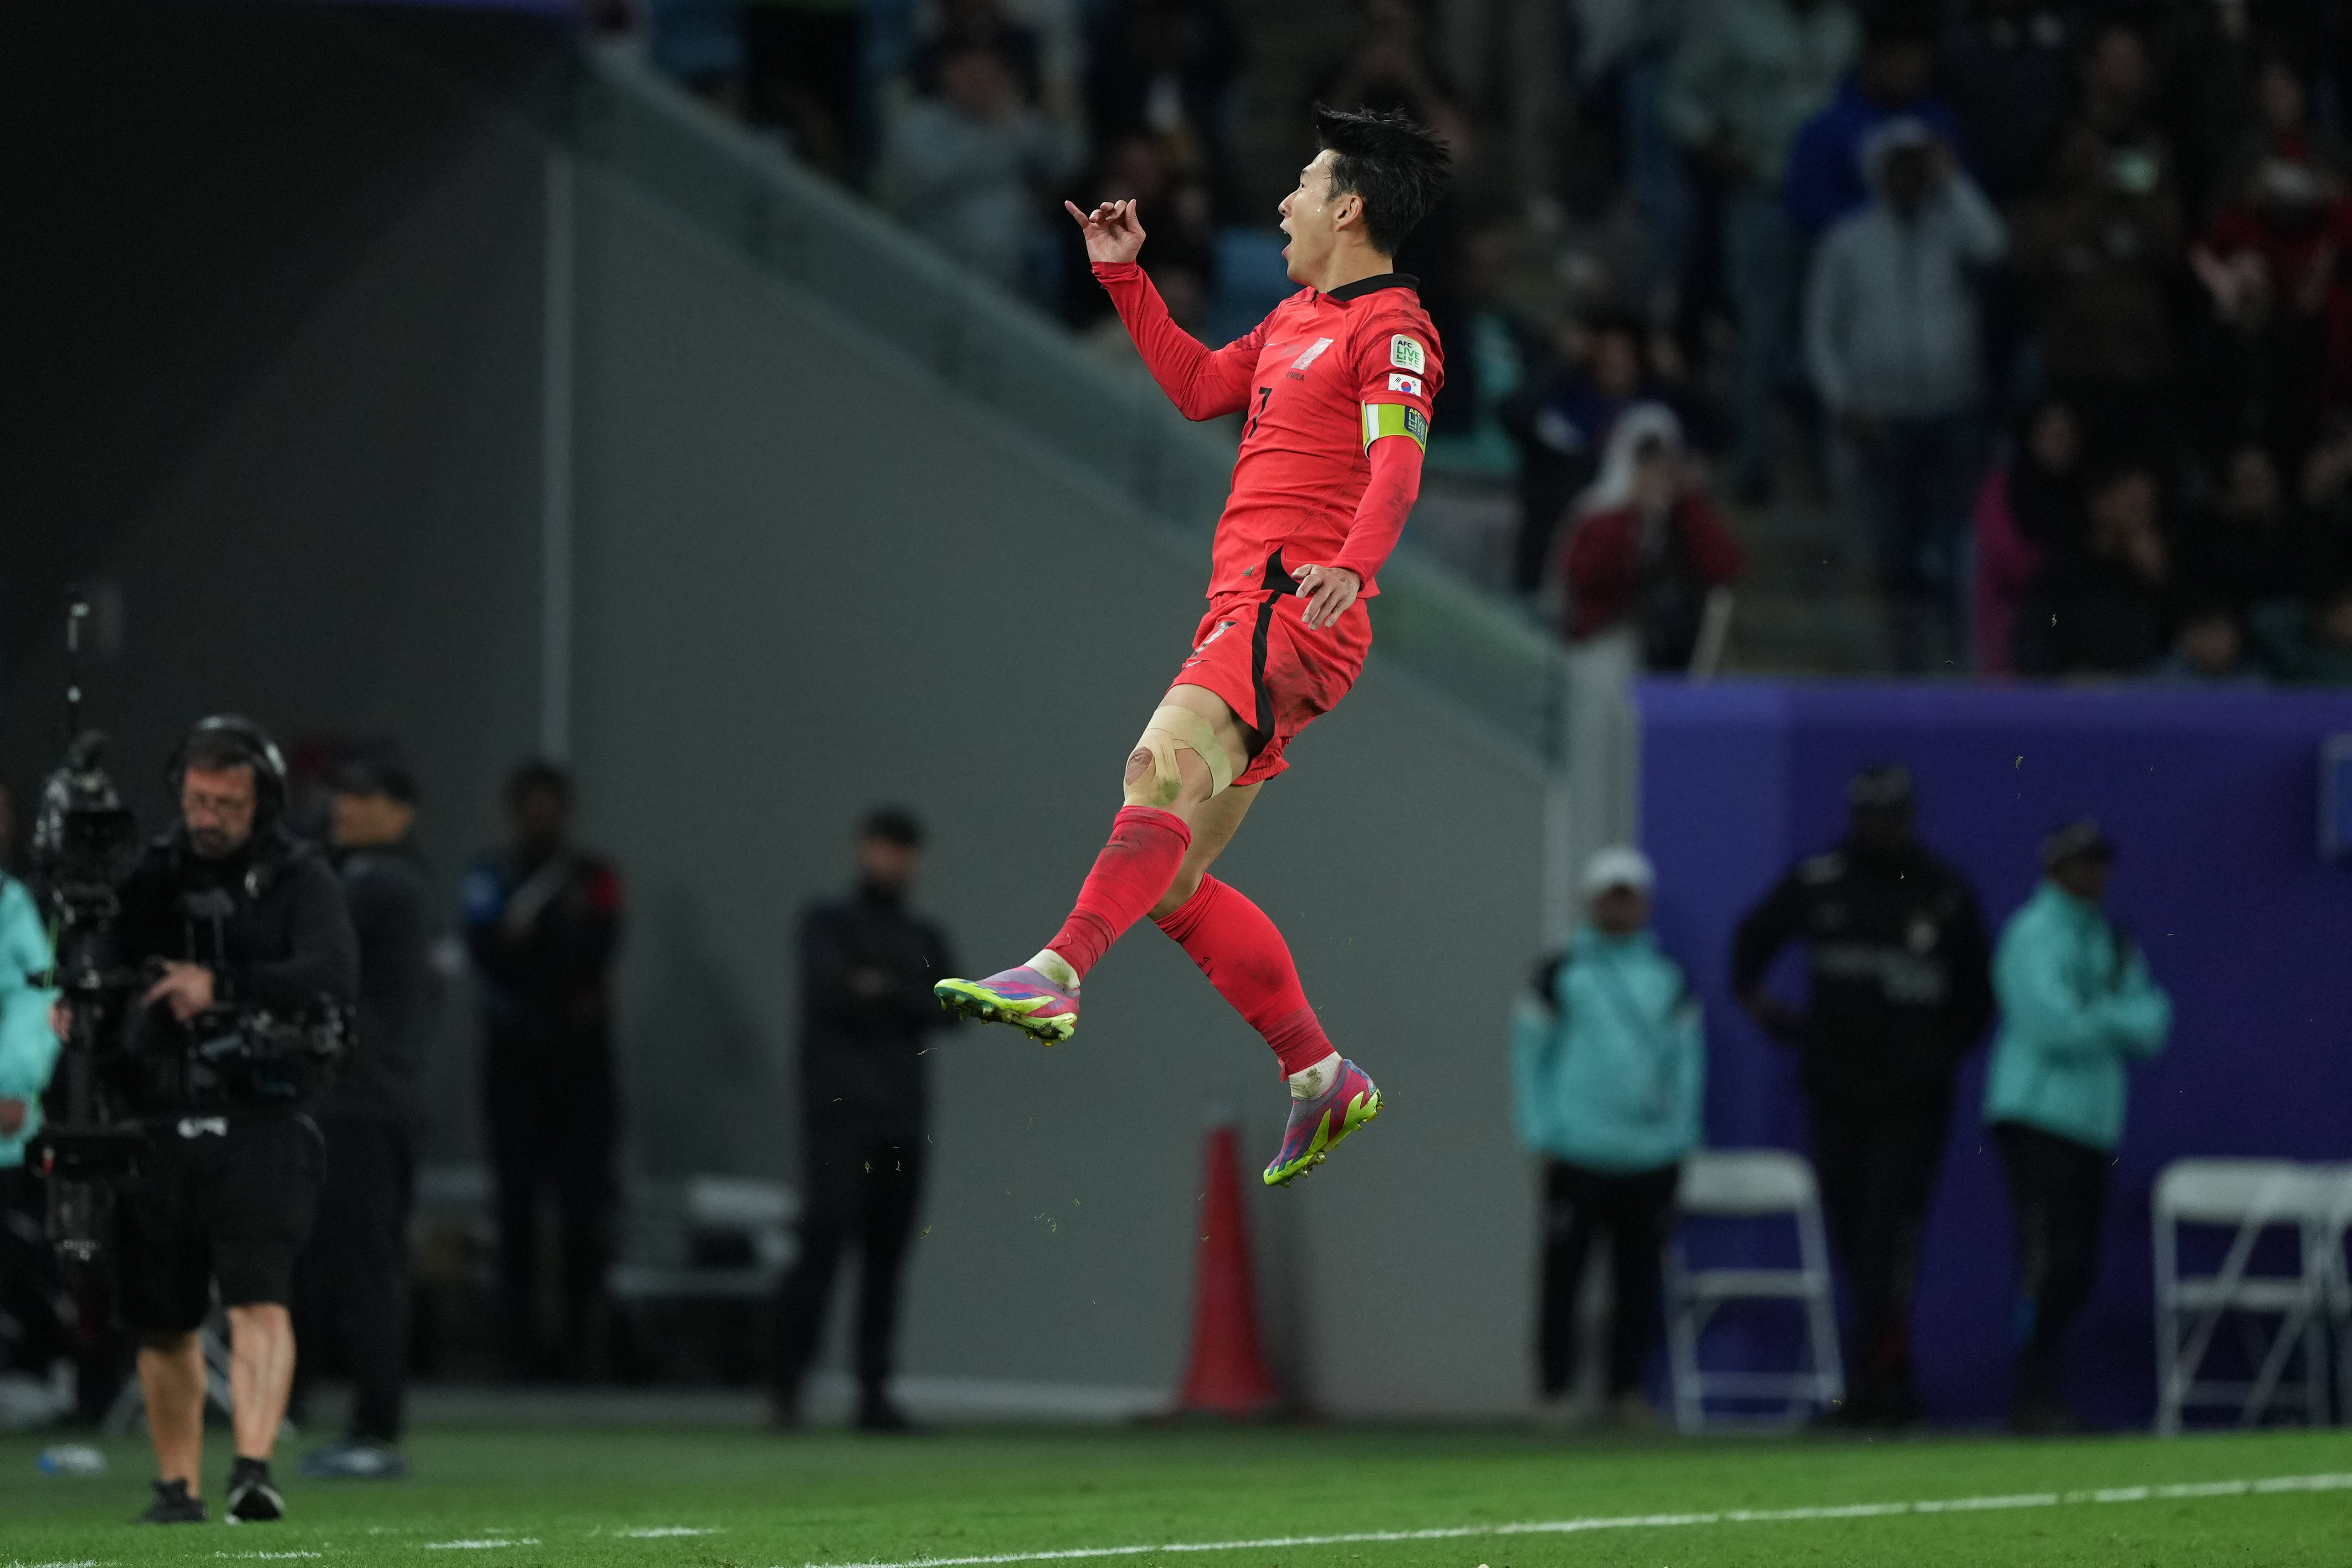 Son Heung-min pictured celebrating after scoring a match-winning free-kick goal for South Korea against Australia in the quarter-finals of the AFC Asian Cup in February 2024